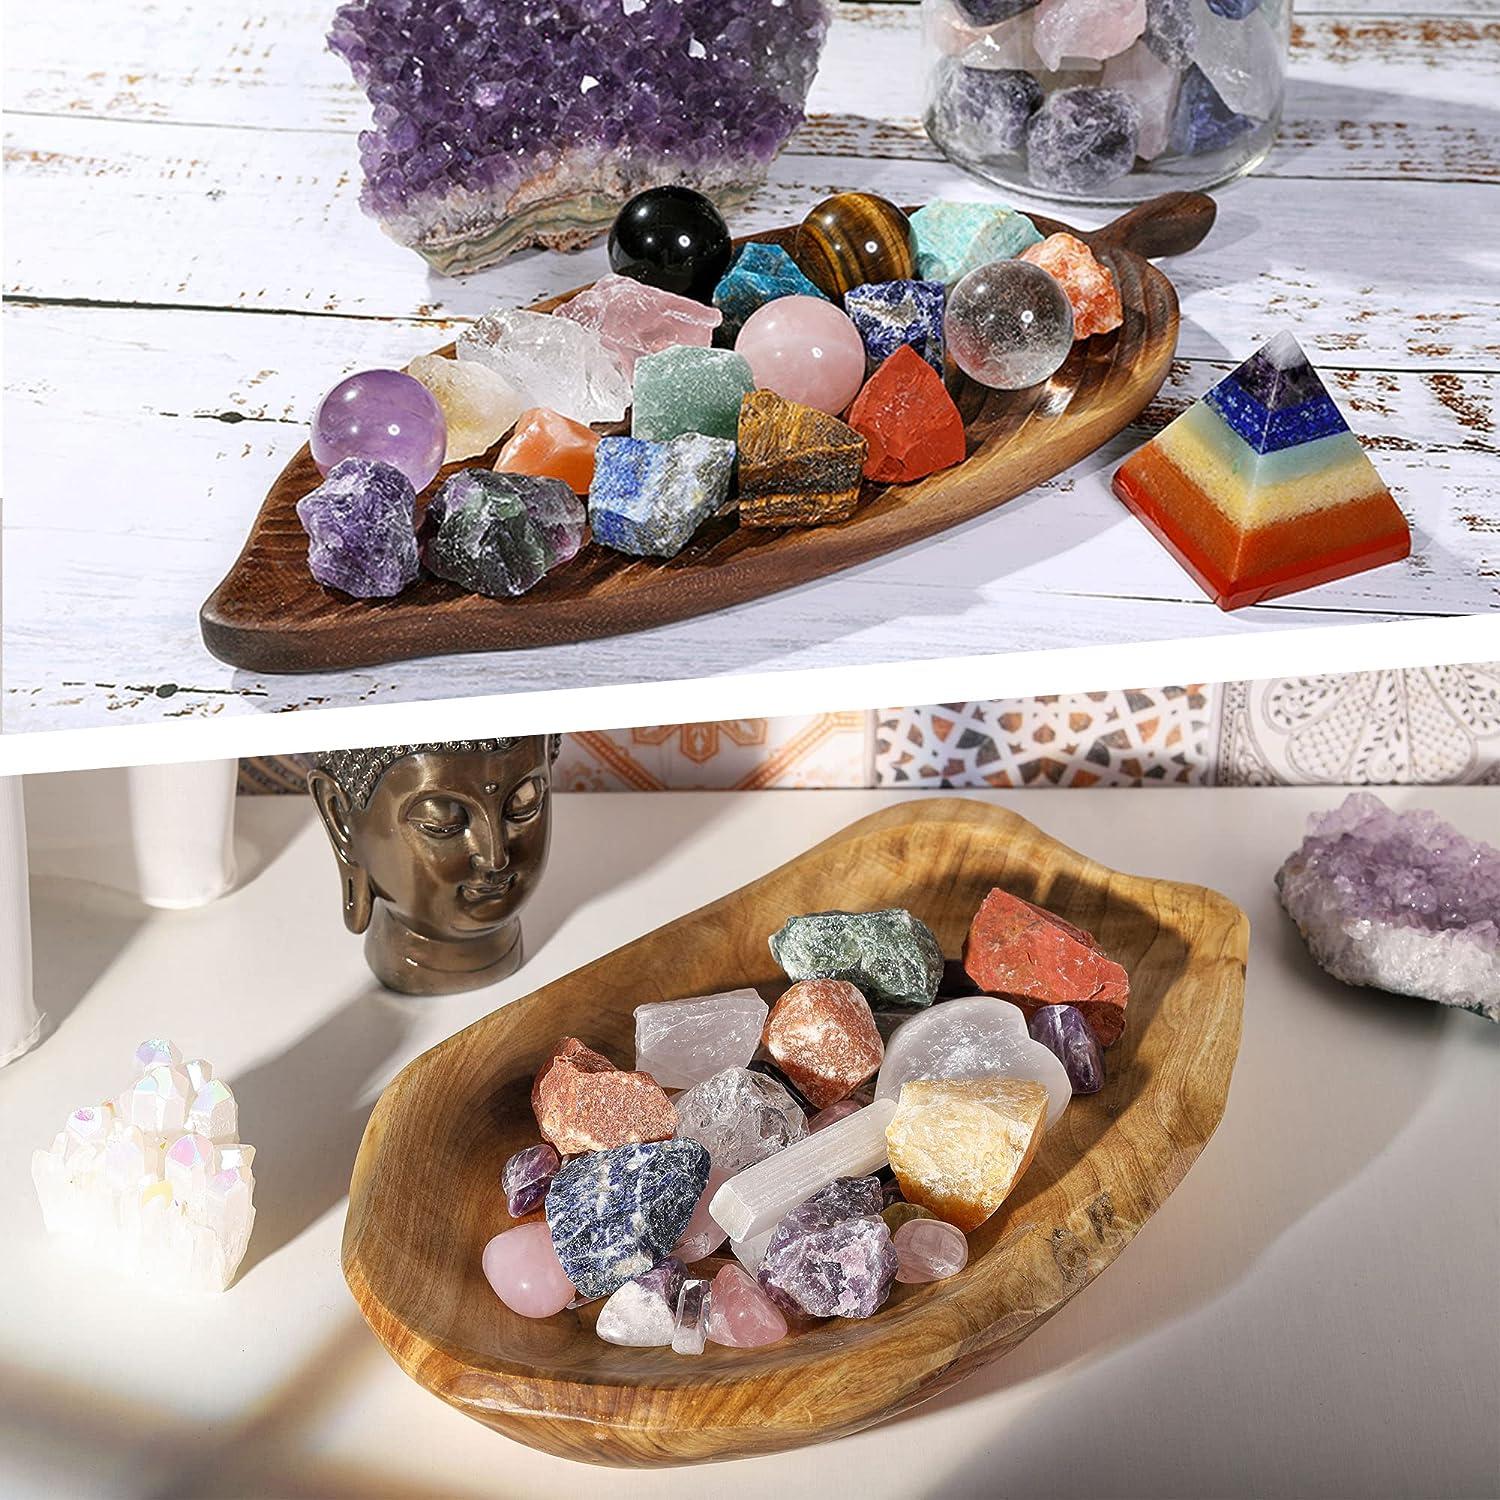 Top Plaza Bulk Amethyst Healing Crystals Rough Stones - Large 1 Natural  Raw Stones Crystal for Reiki Healing, Wicca, Witchcraft, Tumbling, Cabbing,  Fountain Rocks, Decoration, Polishing 0.5lb